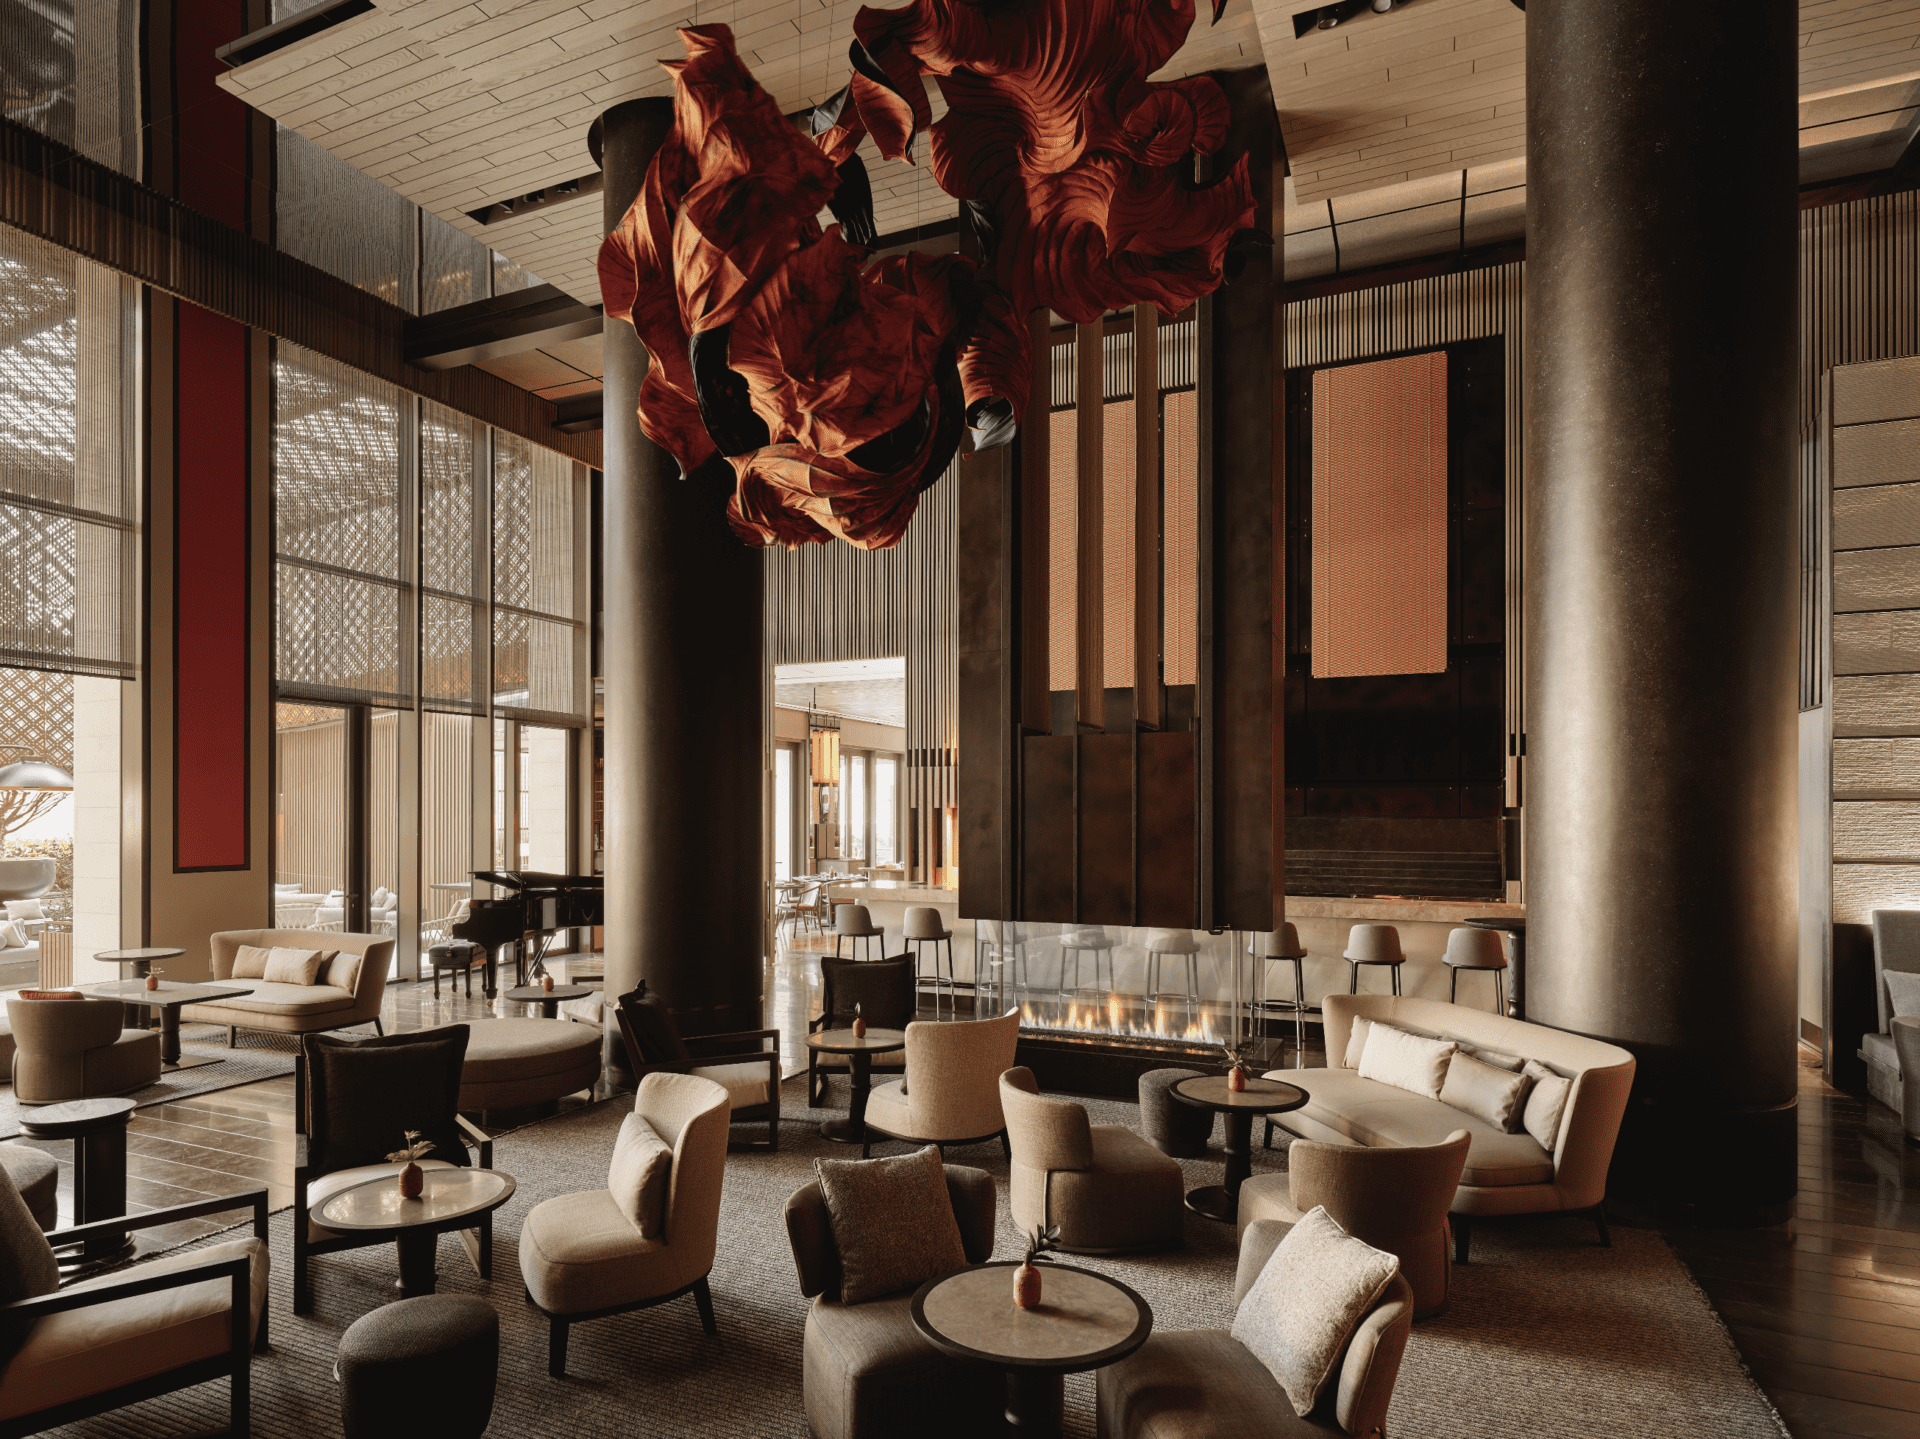 Aman hotel, New York | The bar and lounge area in neutral tones with a sculptural lighting fixture